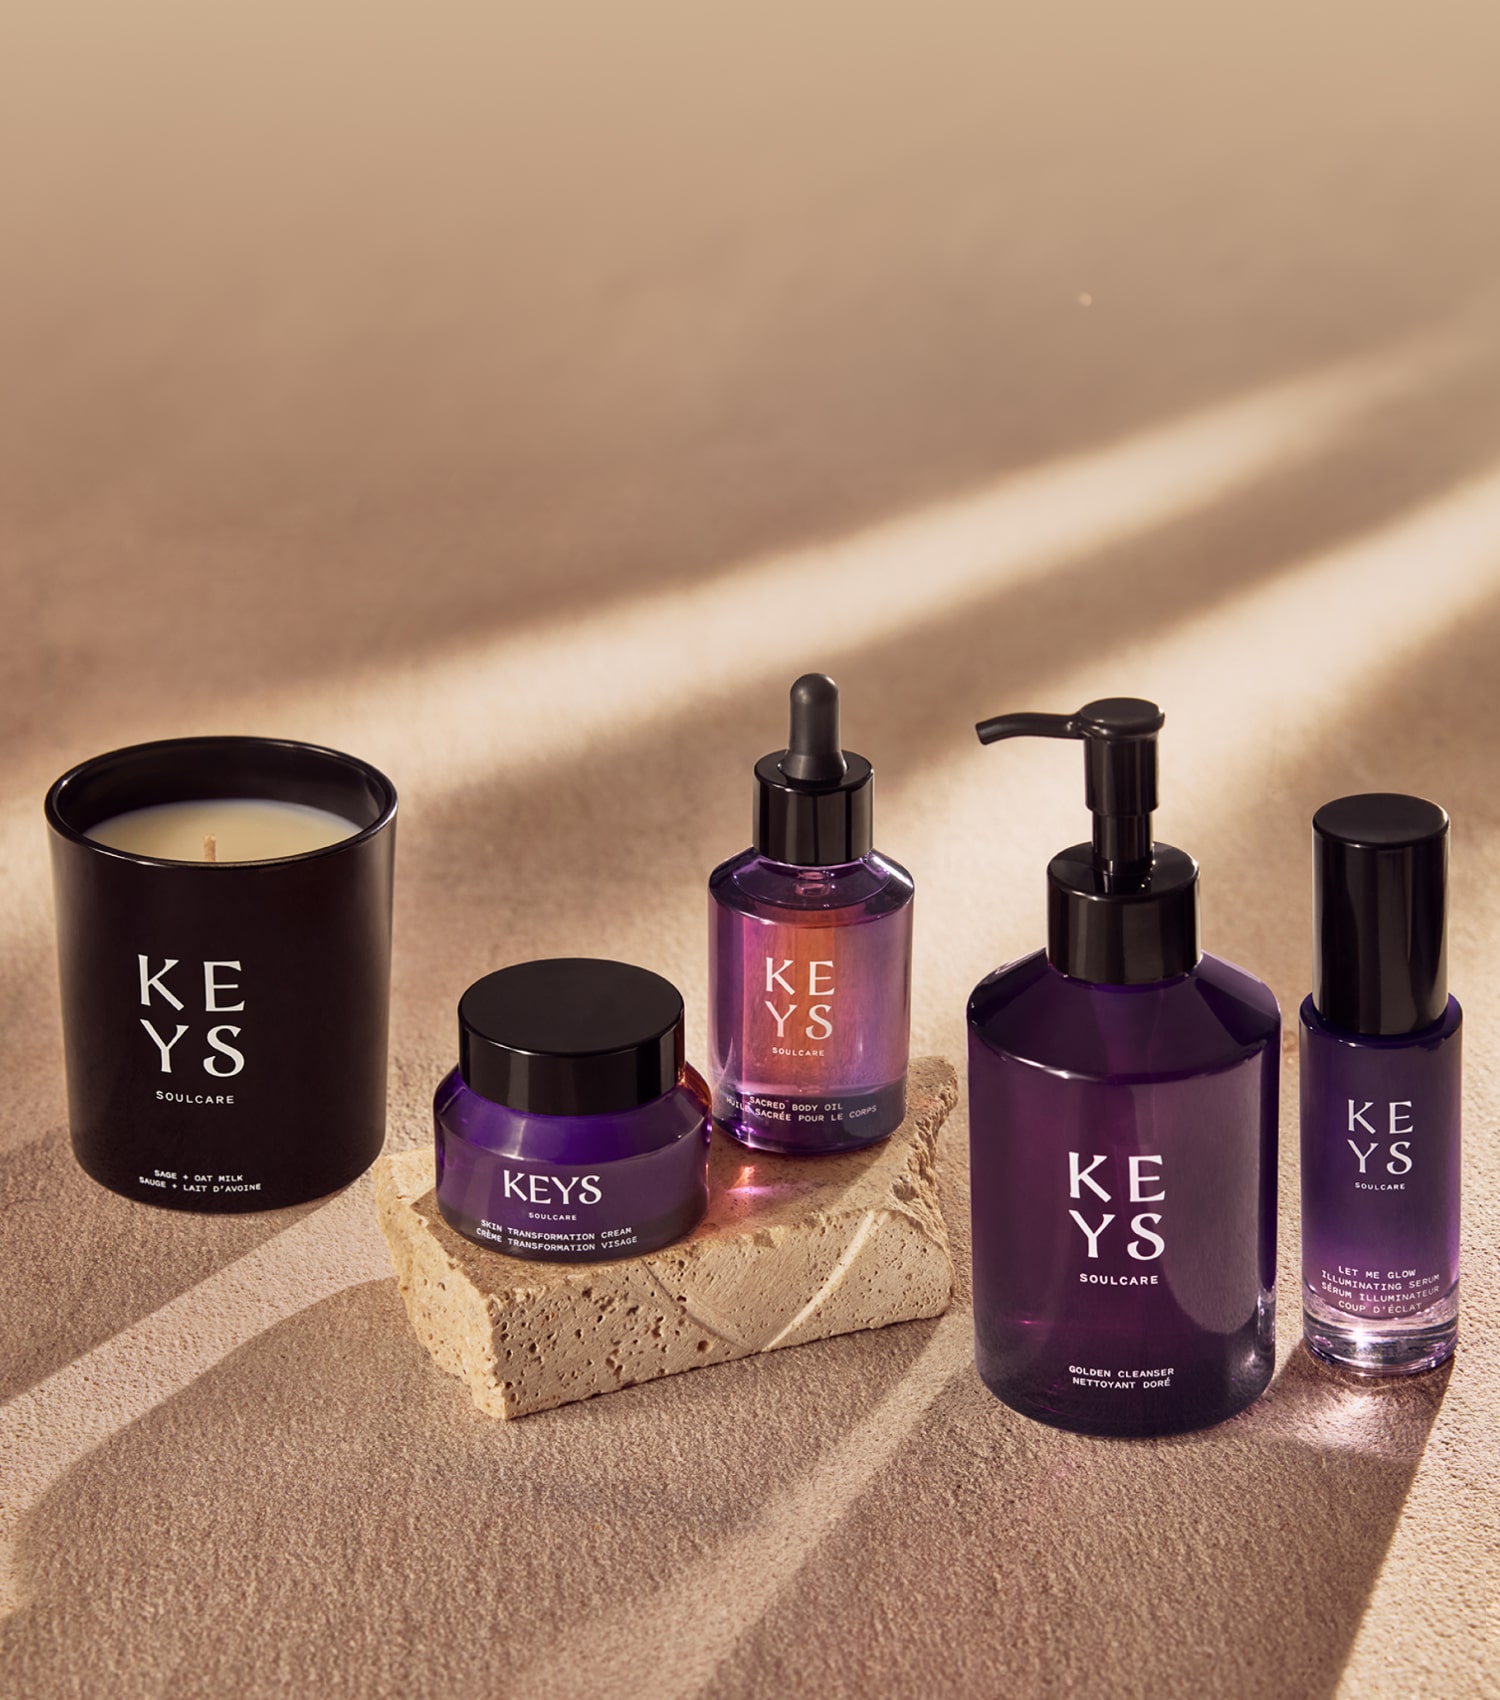 Elegant promotional image for a 'KEYS Soulcare' best sellers collection. The products are displayed on a beige, sandy background with a natural texture. Included in the arrangement is a lit candle in a black container, a small jar of cream, a glass dropper bottle, a pump dispenser bottle, and a small spray bottle, all in a cohesive dark purple color scheme. The large text 'BEST SELLERS' is seen to the right, in an uppercase font, complemented by a message in smaller letters that reads 'Turn your makeup and skincare routines into rituals with these most-loved essentials.